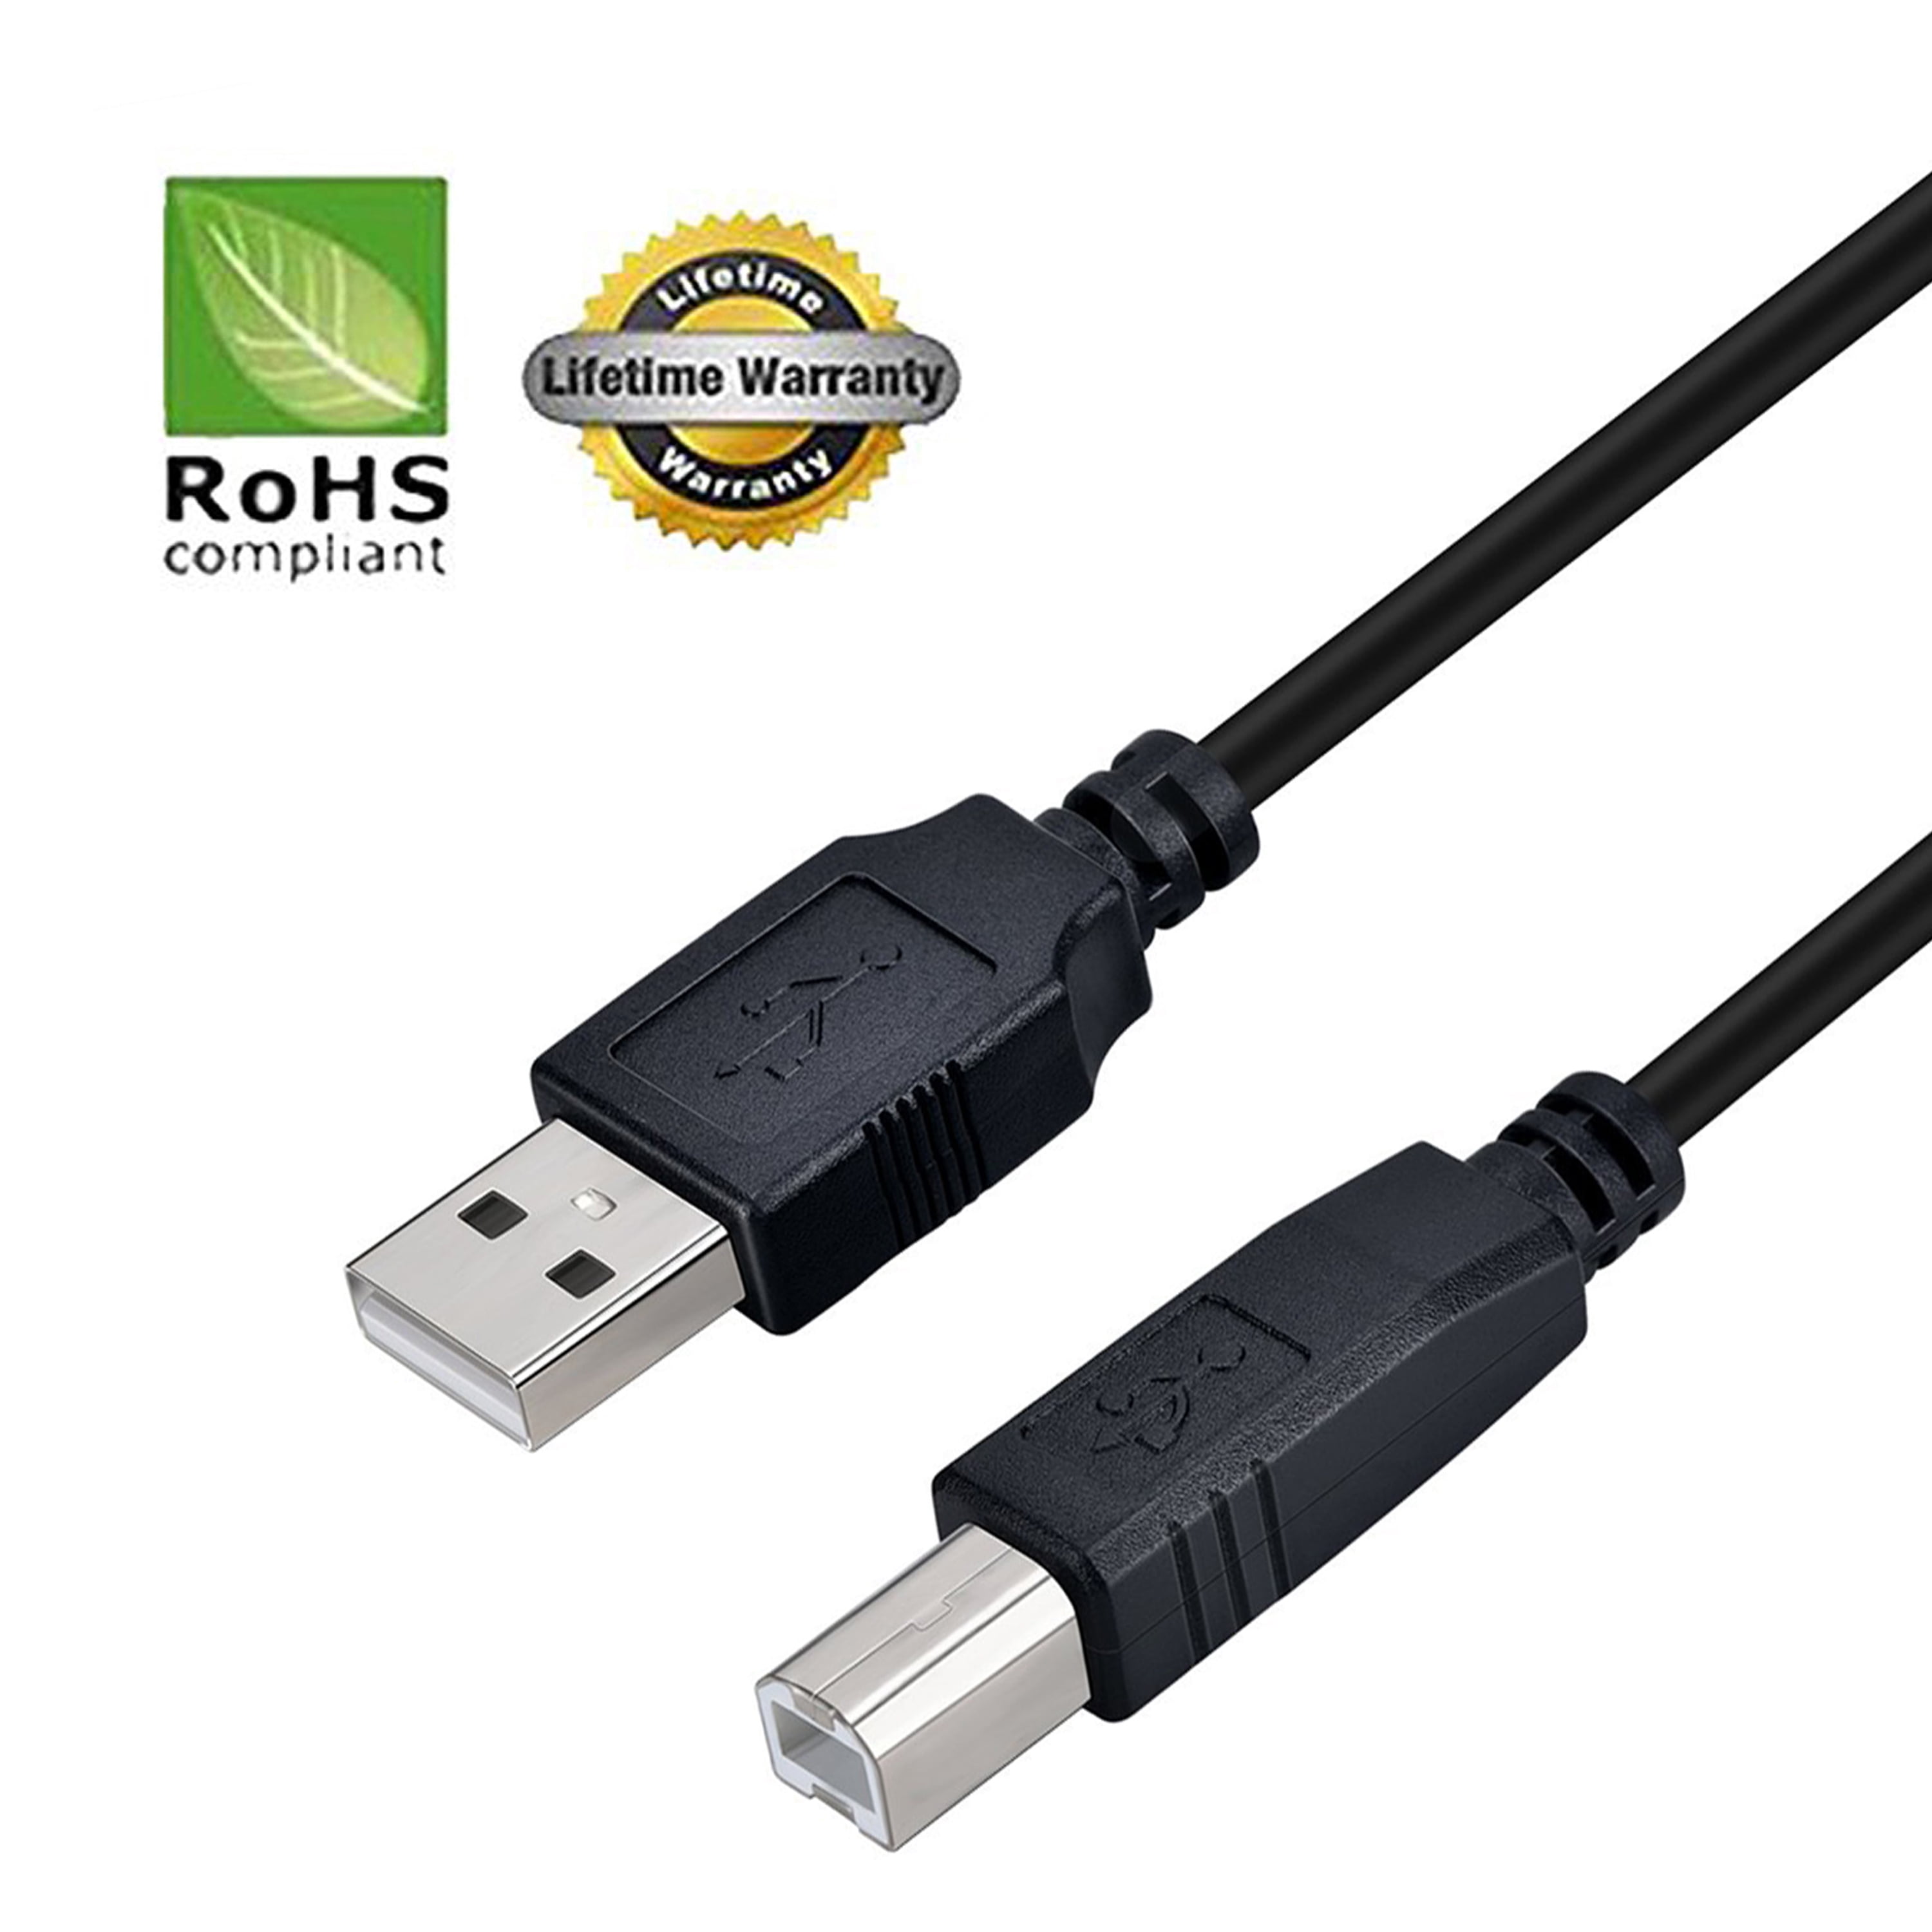 10ft AC Power Cord for Canon PIXMA MP IP PRINTER SERIES 10FT Black AC Power Cord eCool4U 10ft Printer USB Cable